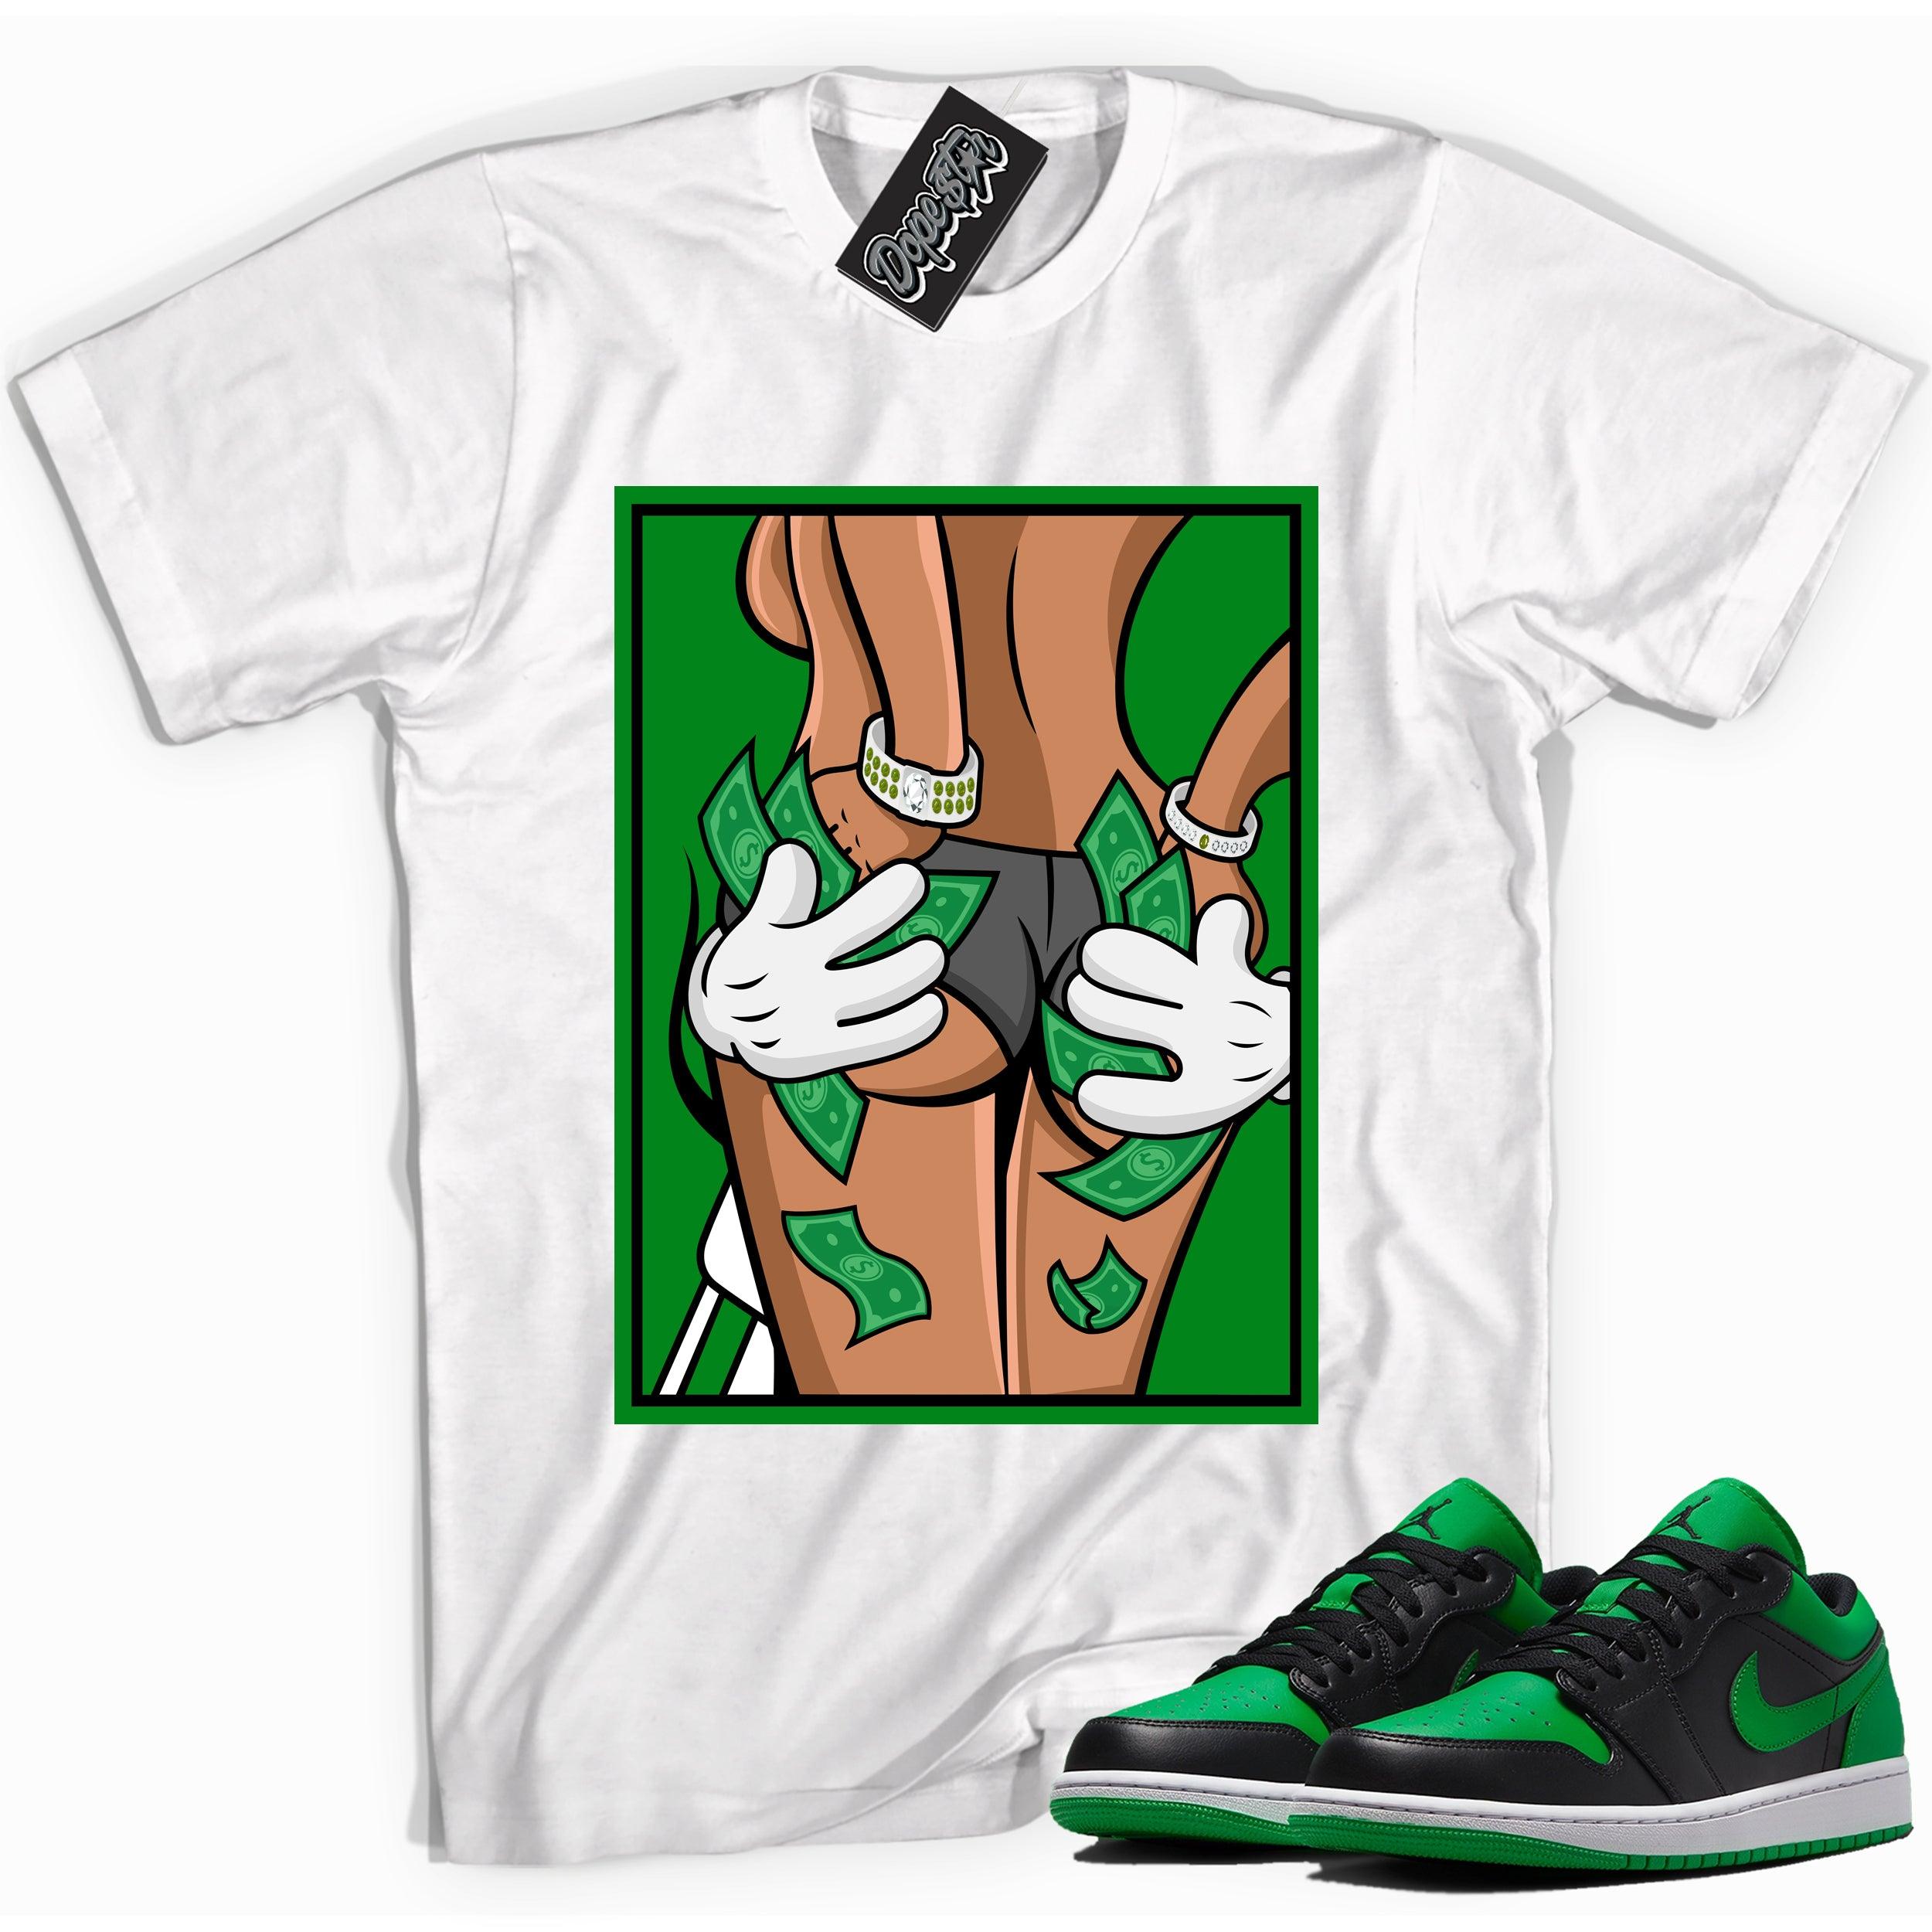 Cool white graphic tee with 'hands full' print, that perfectly matches Air Jordan 1 Low Lucky Green sneakers